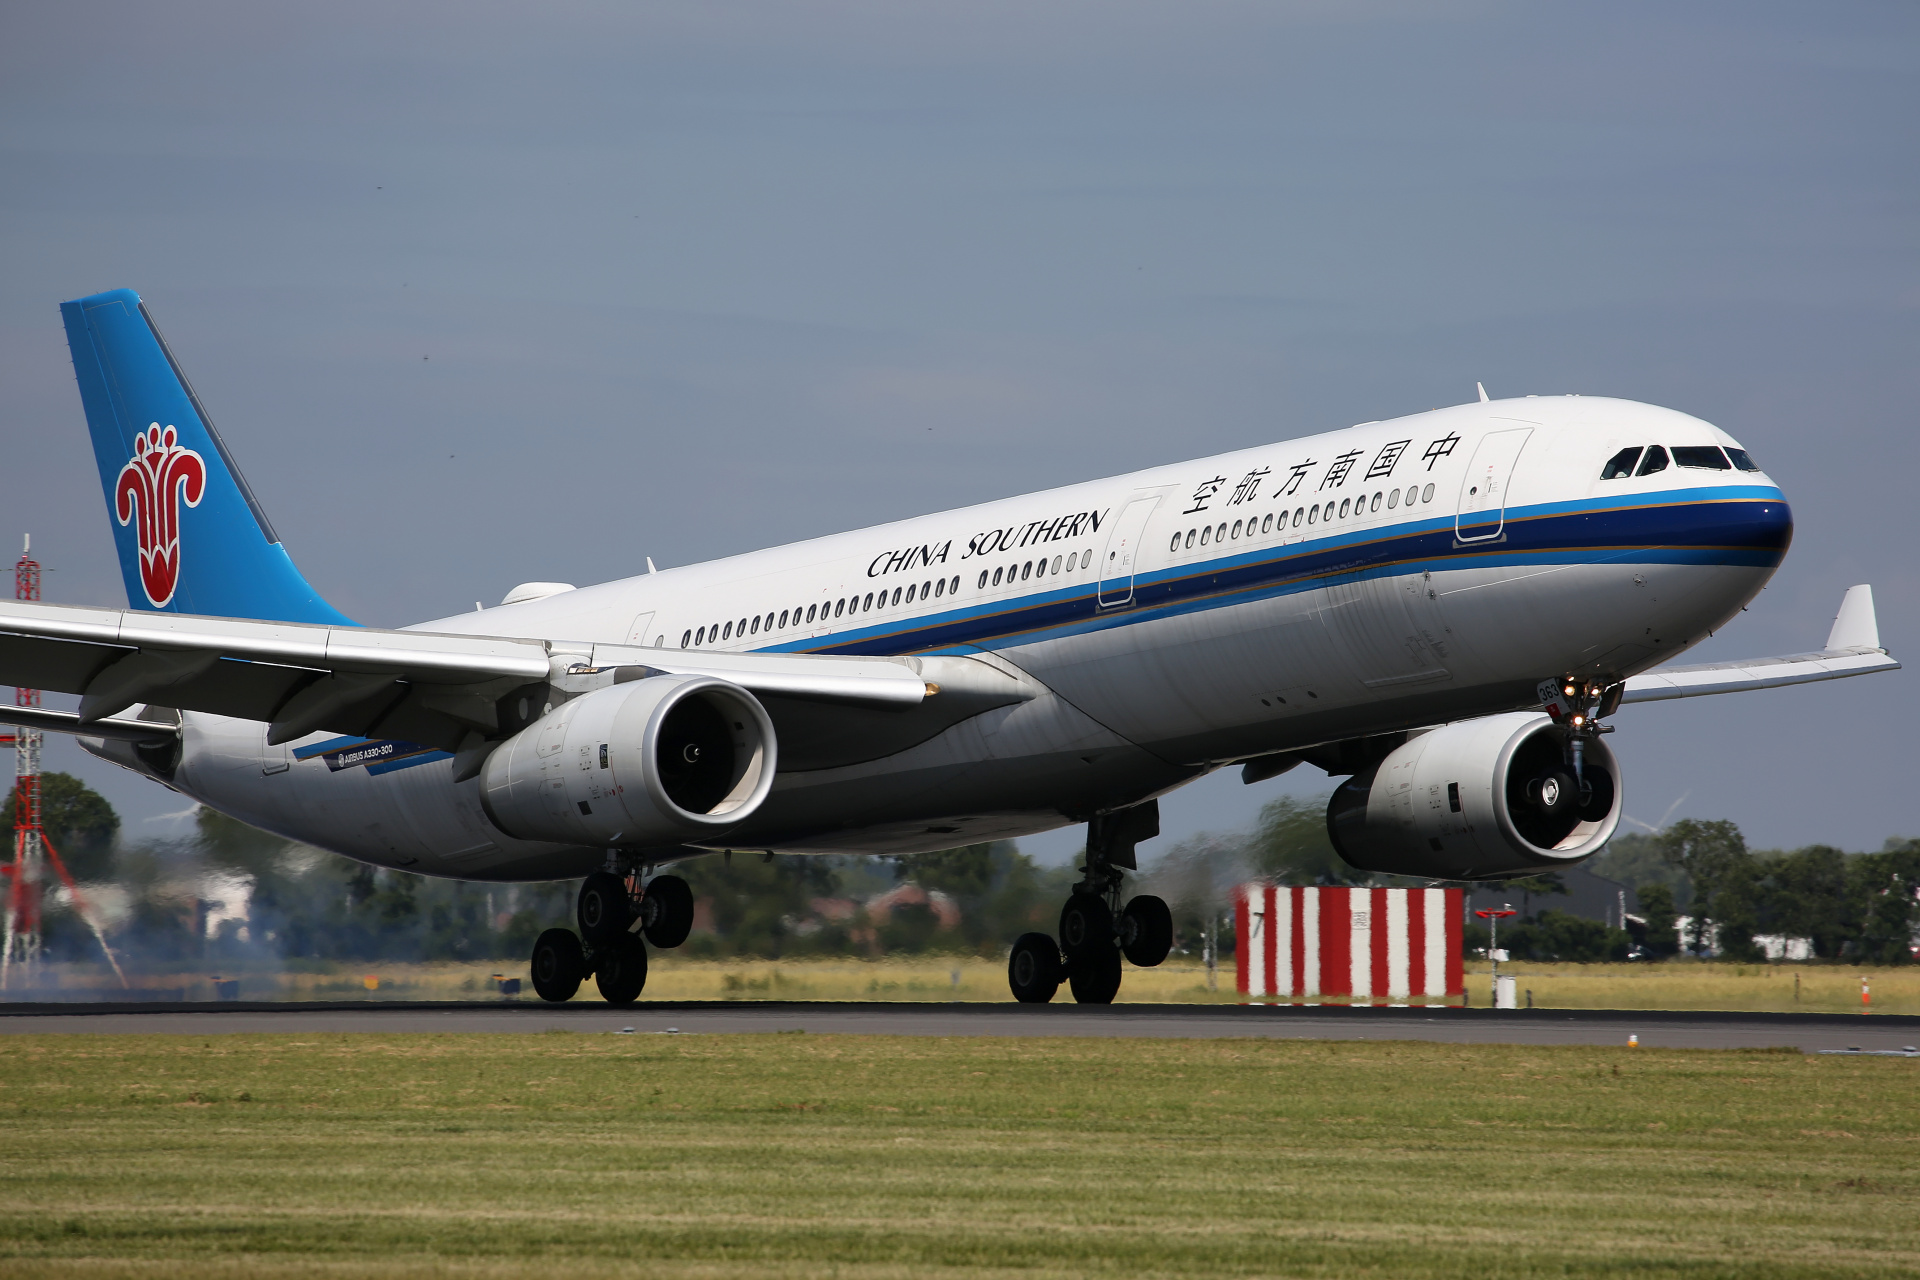 B-8363, China Southern Airlines (Aircraft » Schiphol Spotting » Airbus A330-300)